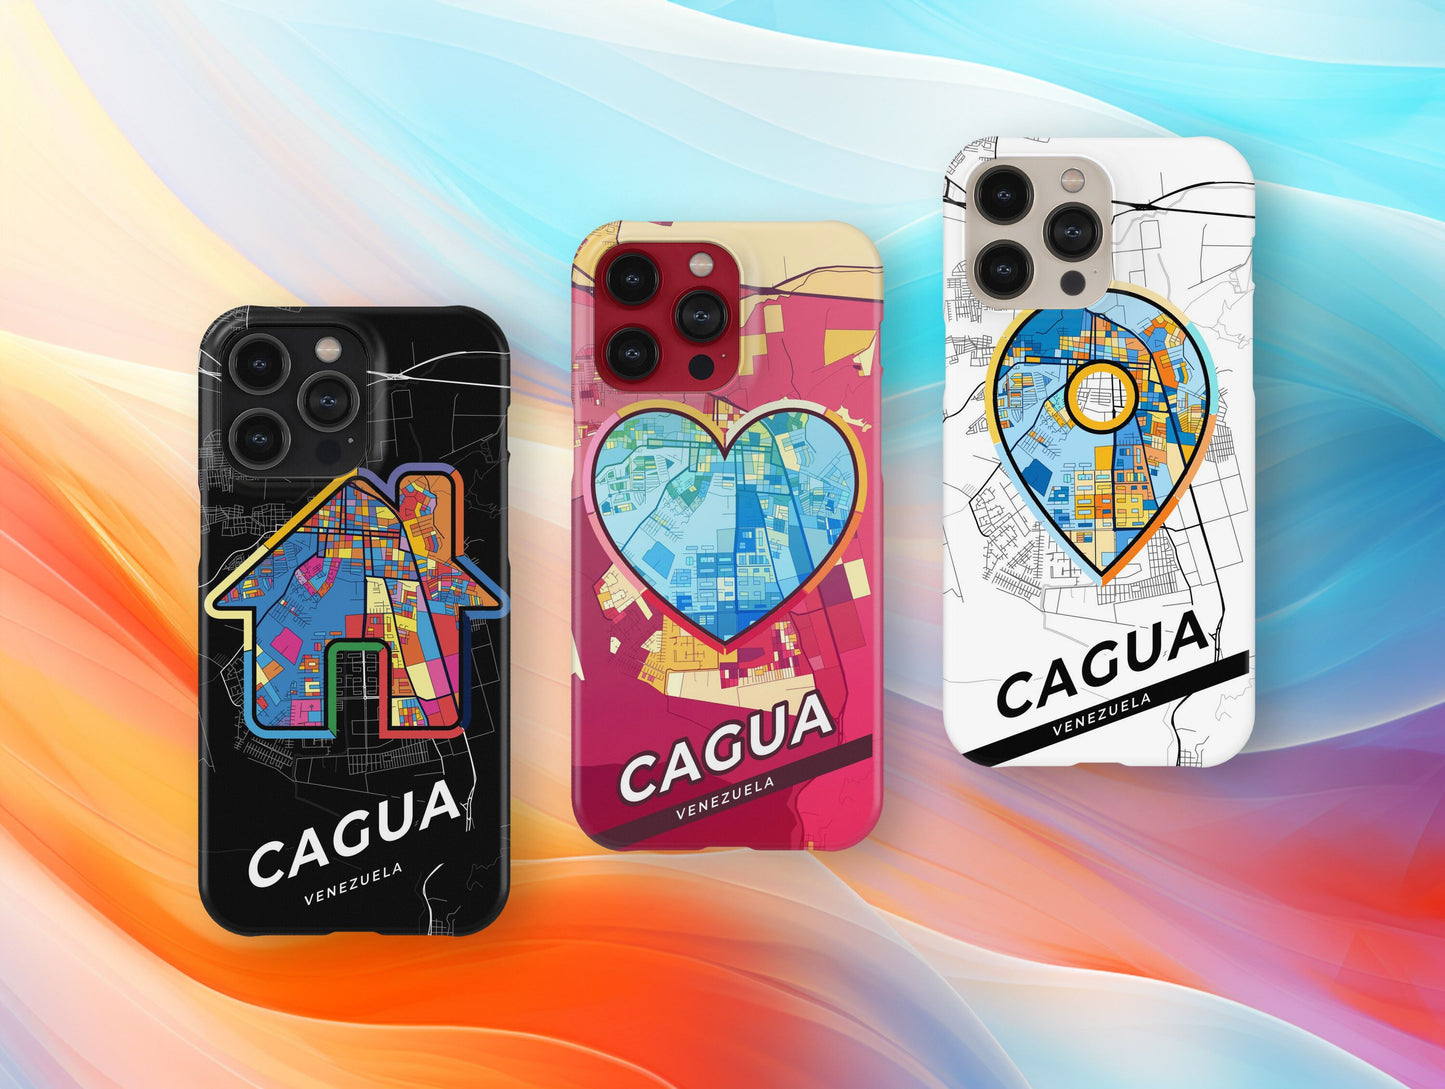 Cagua Venezuela slim phone case with colorful icon. Birthday, wedding or housewarming gift. Couple match cases.